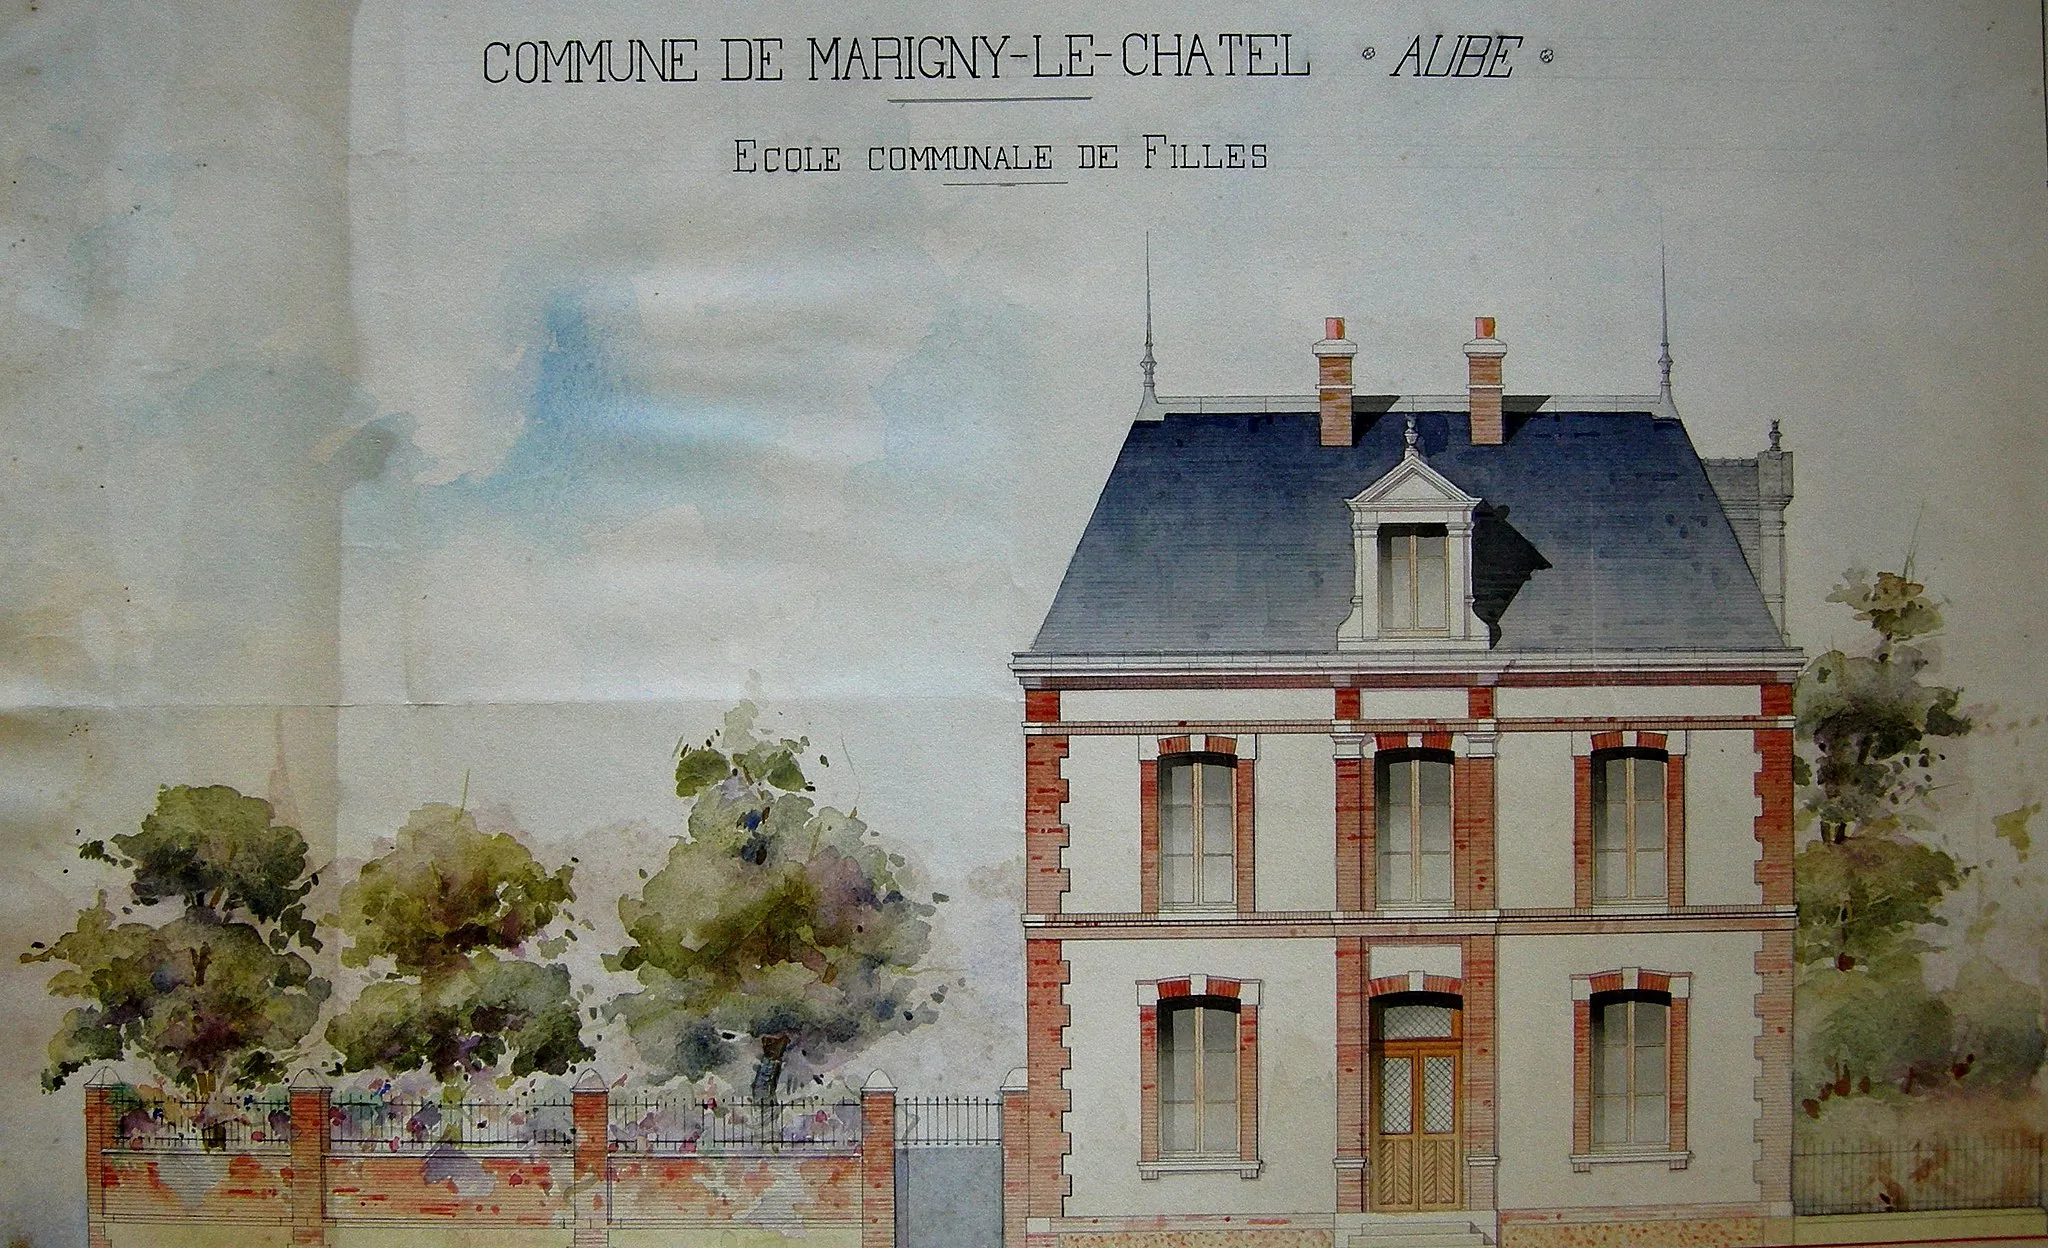 Image of Champagne-Ardenne